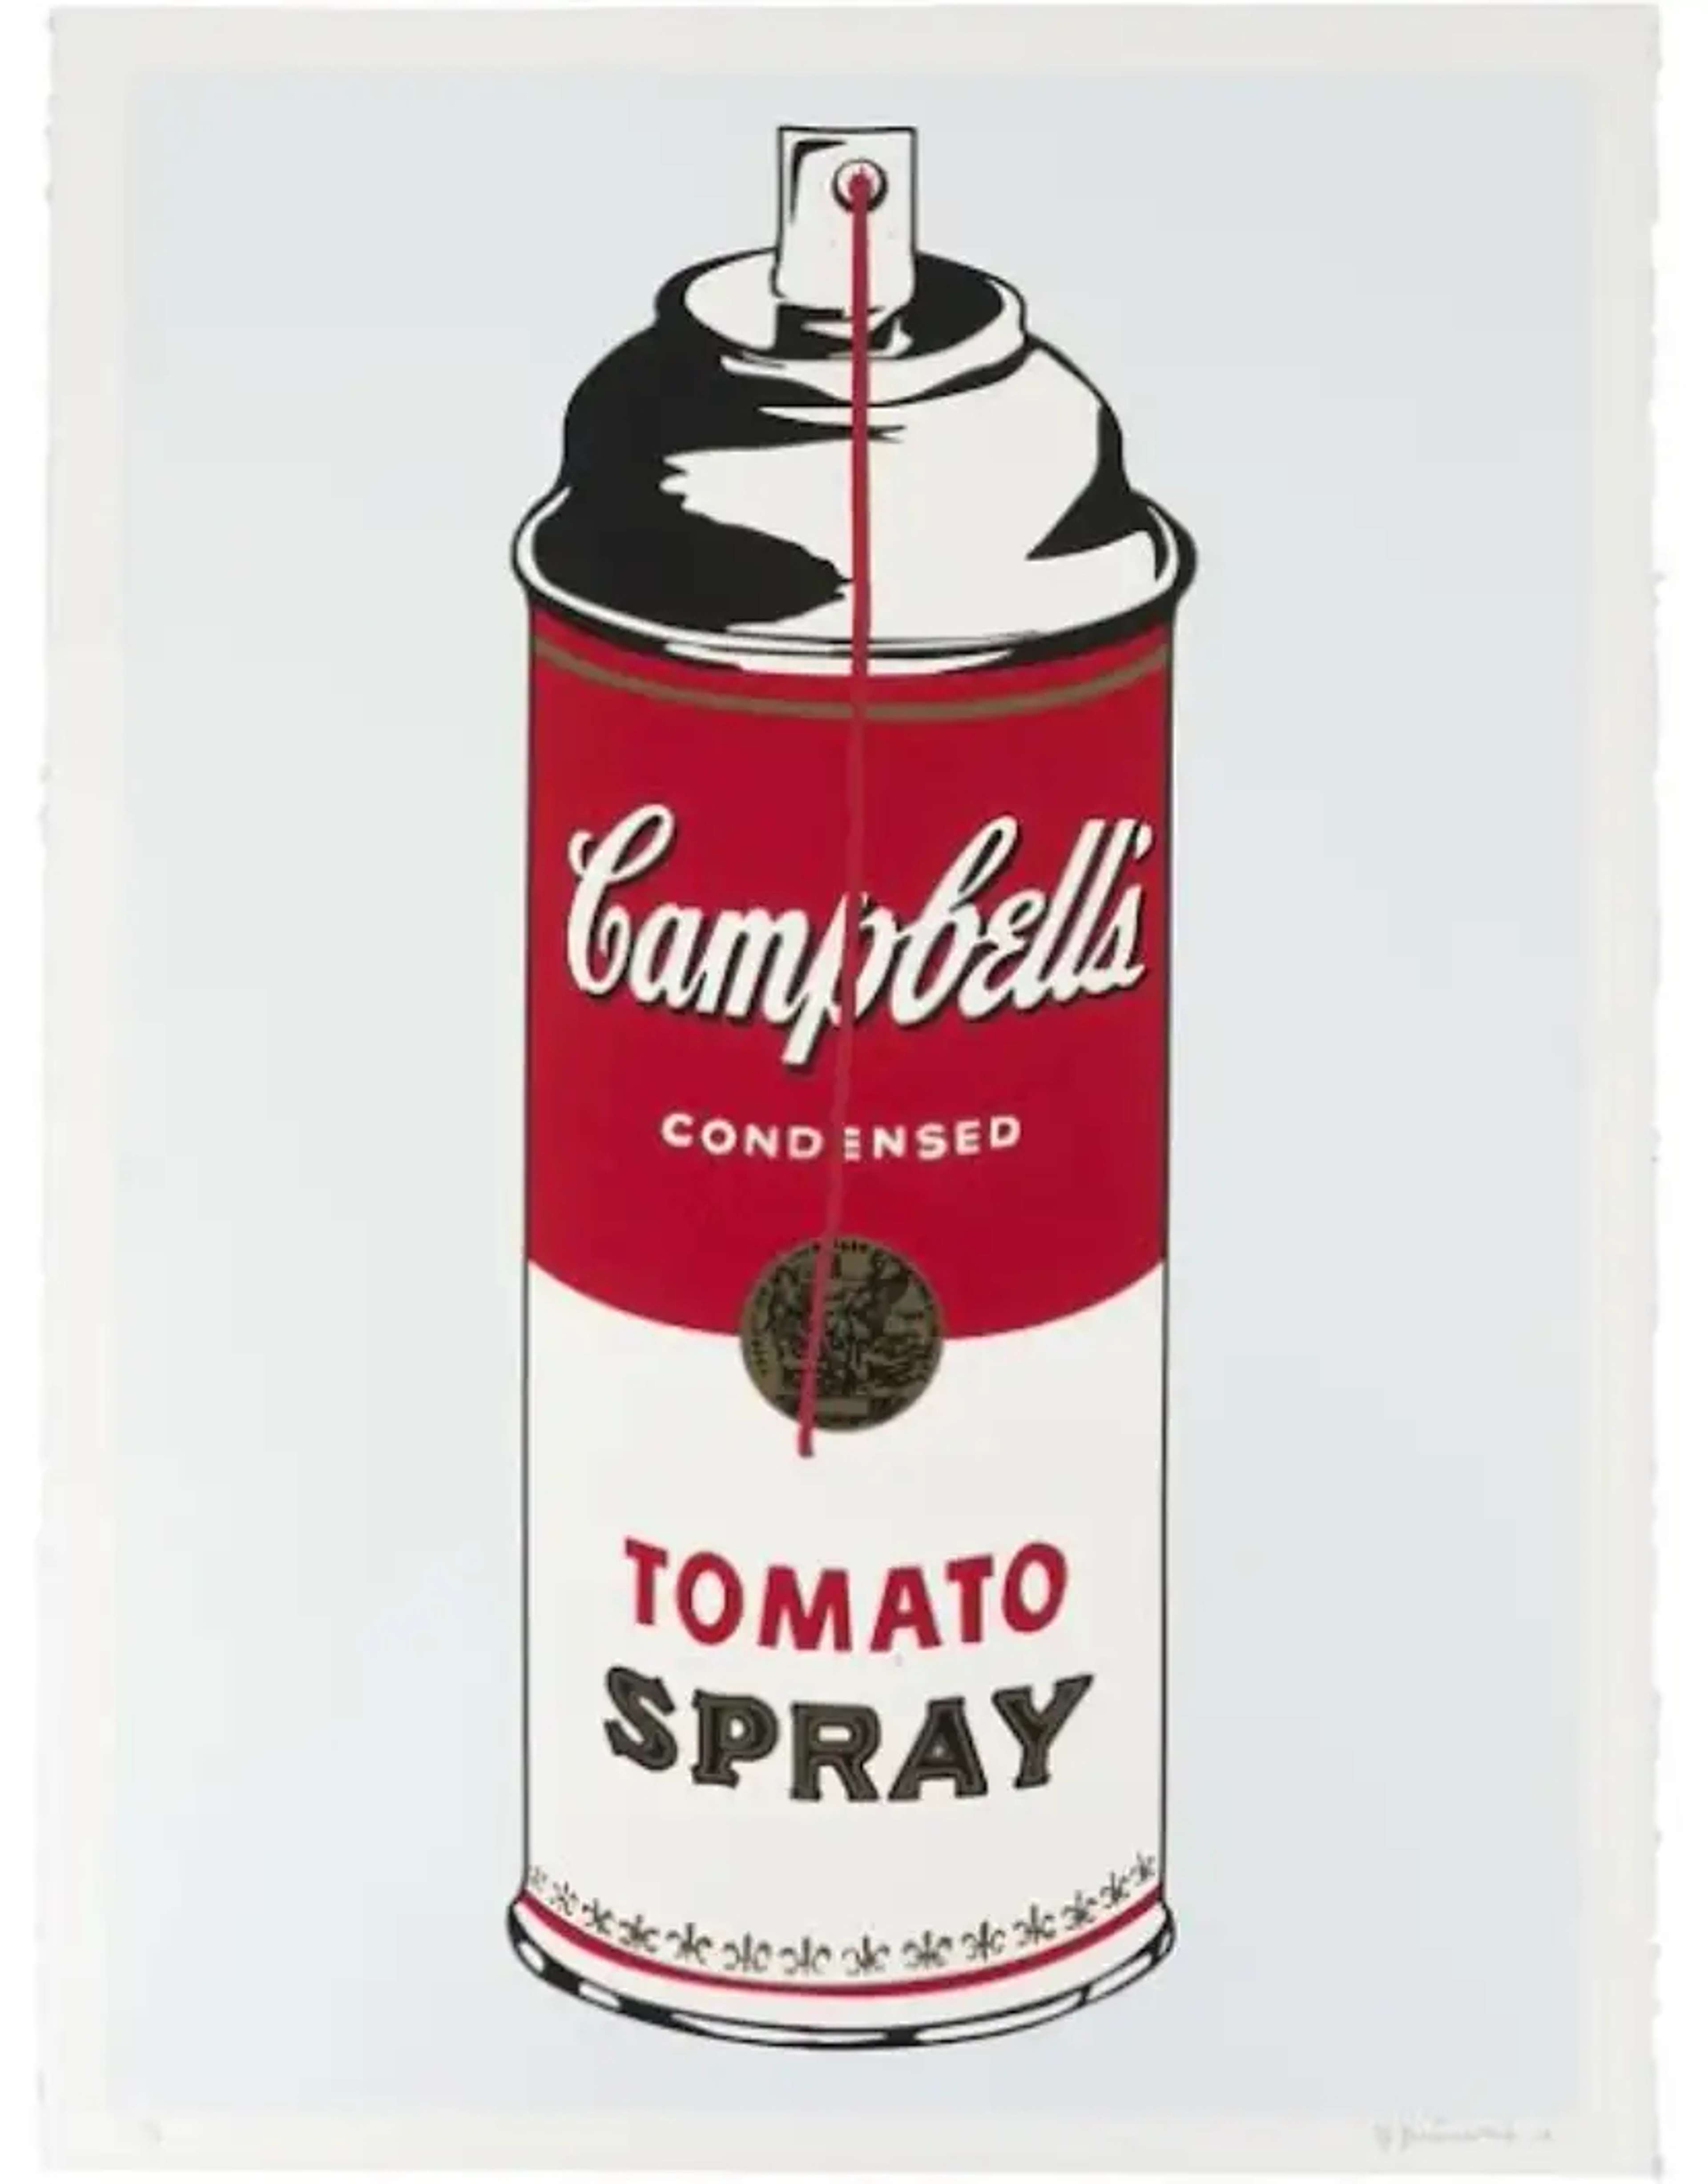 A transformed image by Mr. Brainwash featuring an appropriated Campbell's soup can from pop artist Andy Warhol, now depicted as a spray paint can.